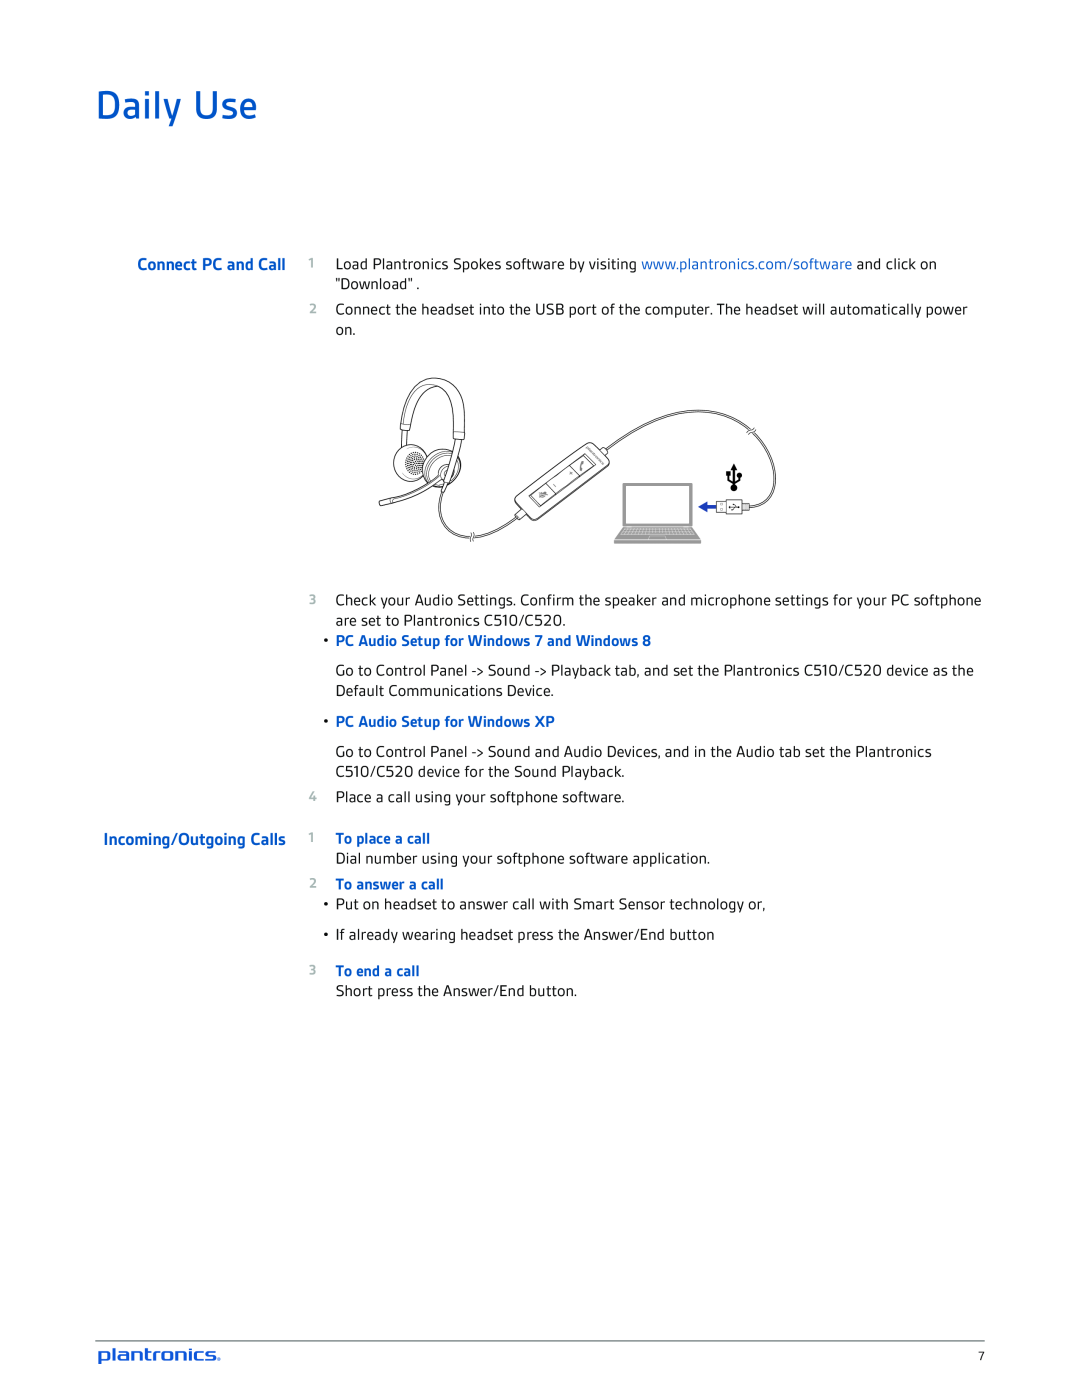 Plantronics C510, C520 manual Daily Use, Incoming/Outgoing Calls 1 To place a call, PC Audio Setup for Windows 7 and Windows 